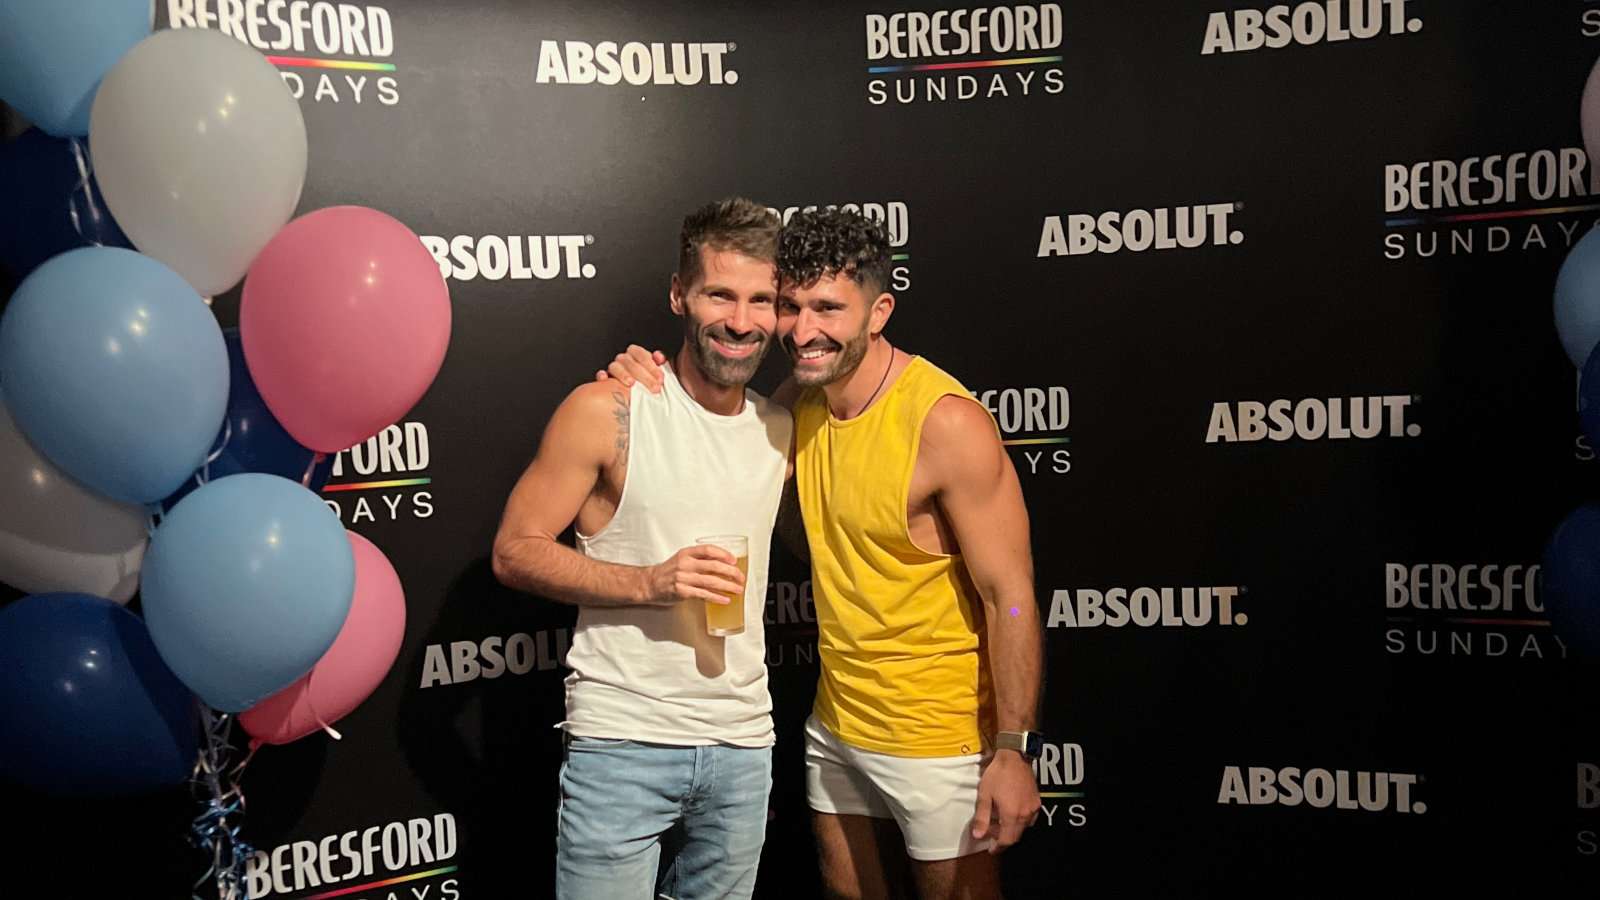 Stef and Seby at the Beresford Sunday gay party in Sydney.